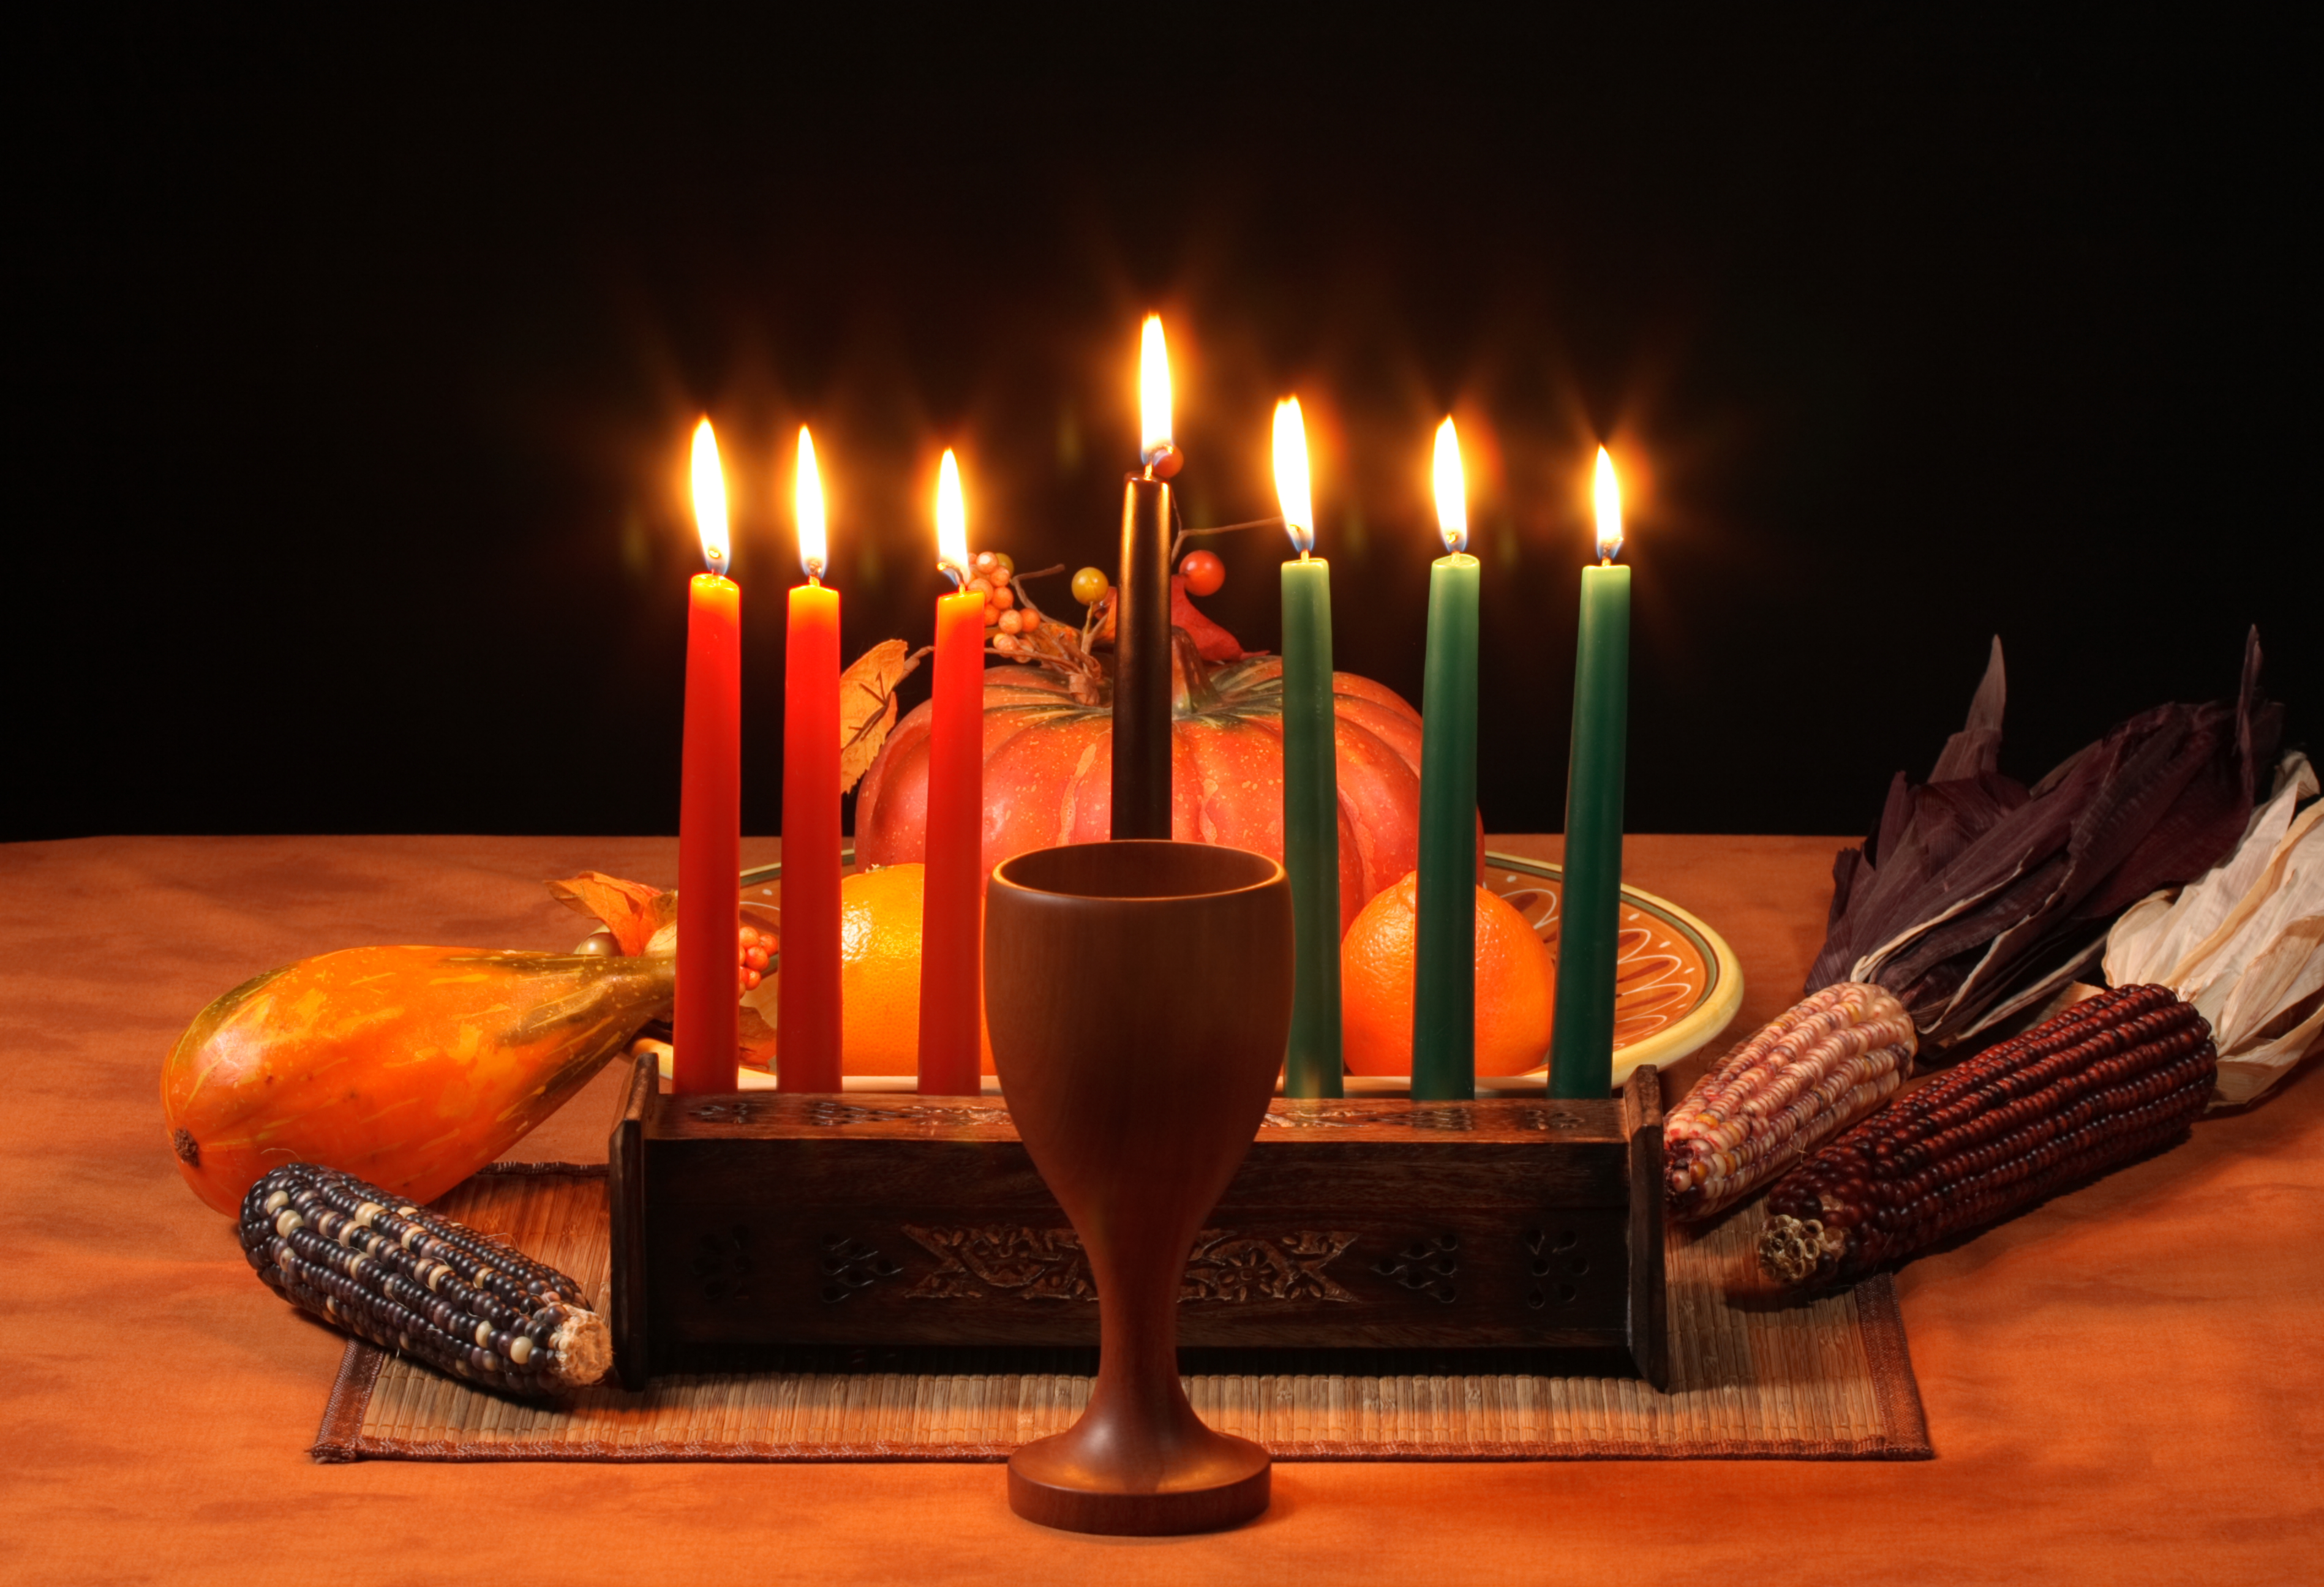 Burning candles with corn, a pumpkin and a goblet on a placemat.